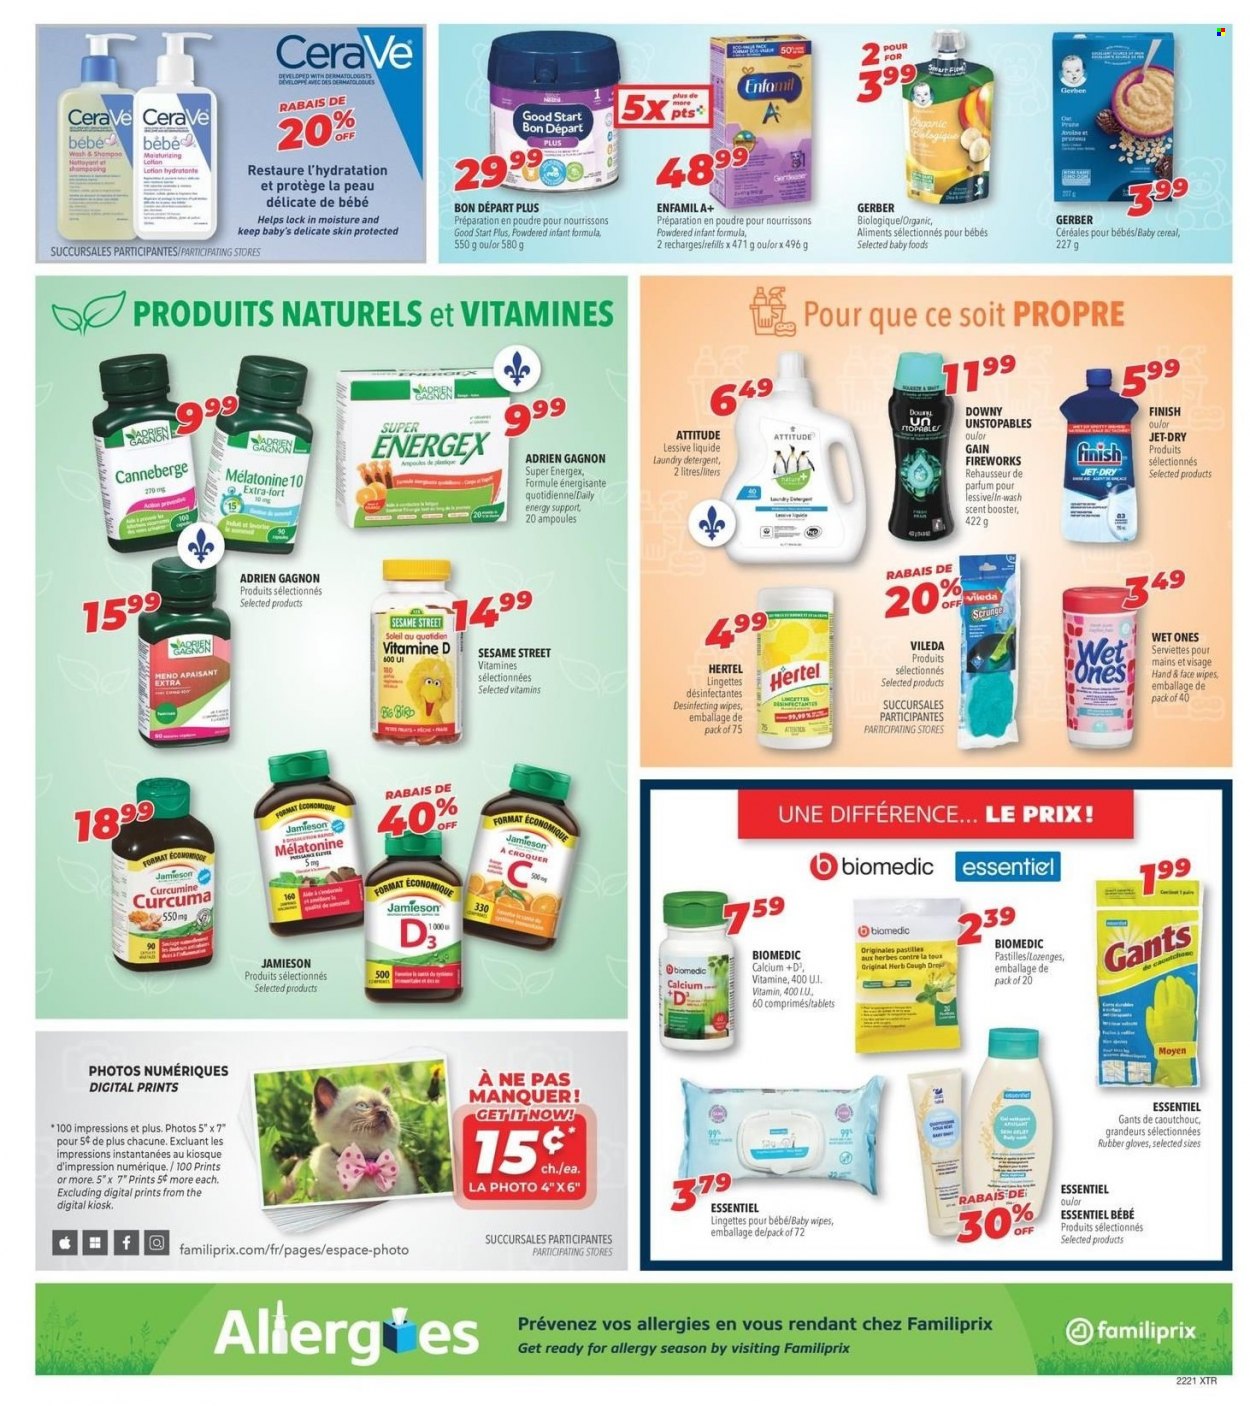 thumbnail - Familiprix Extra Flyer - May 19, 2022 - May 25, 2022 - Sales products - pastilles, Sesame Street, Gerber, cereals, herbs, wipes, Gain, Unstopables, laundry detergent, Gain Fireworks, Jet, CeraVe, body lotion, eau de parfum, gloves, calcium, detergent, shampoo. Page 7.